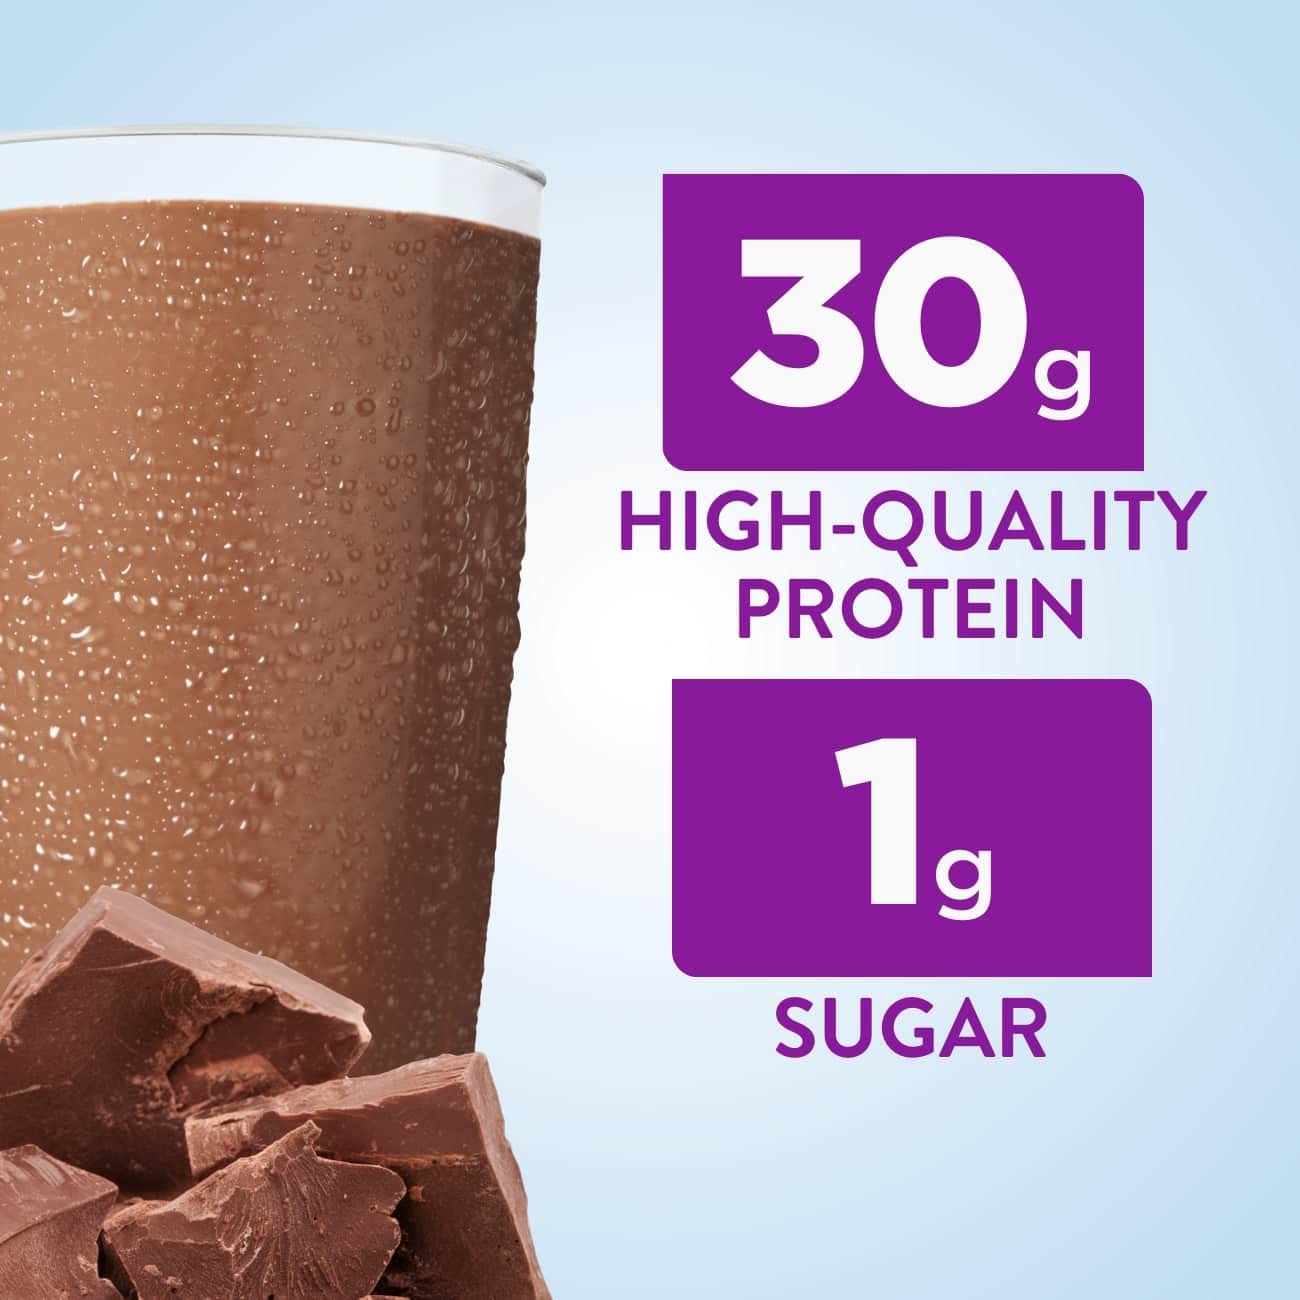 Ensure Max Protein Nutrition Shake with 30g of Protein & Max High Protein Nutrition Shake Milk with 30g of Protein 1g of Sugar, Chocolate w/Caffeine, 11 Fl Oz (Pack of 12)